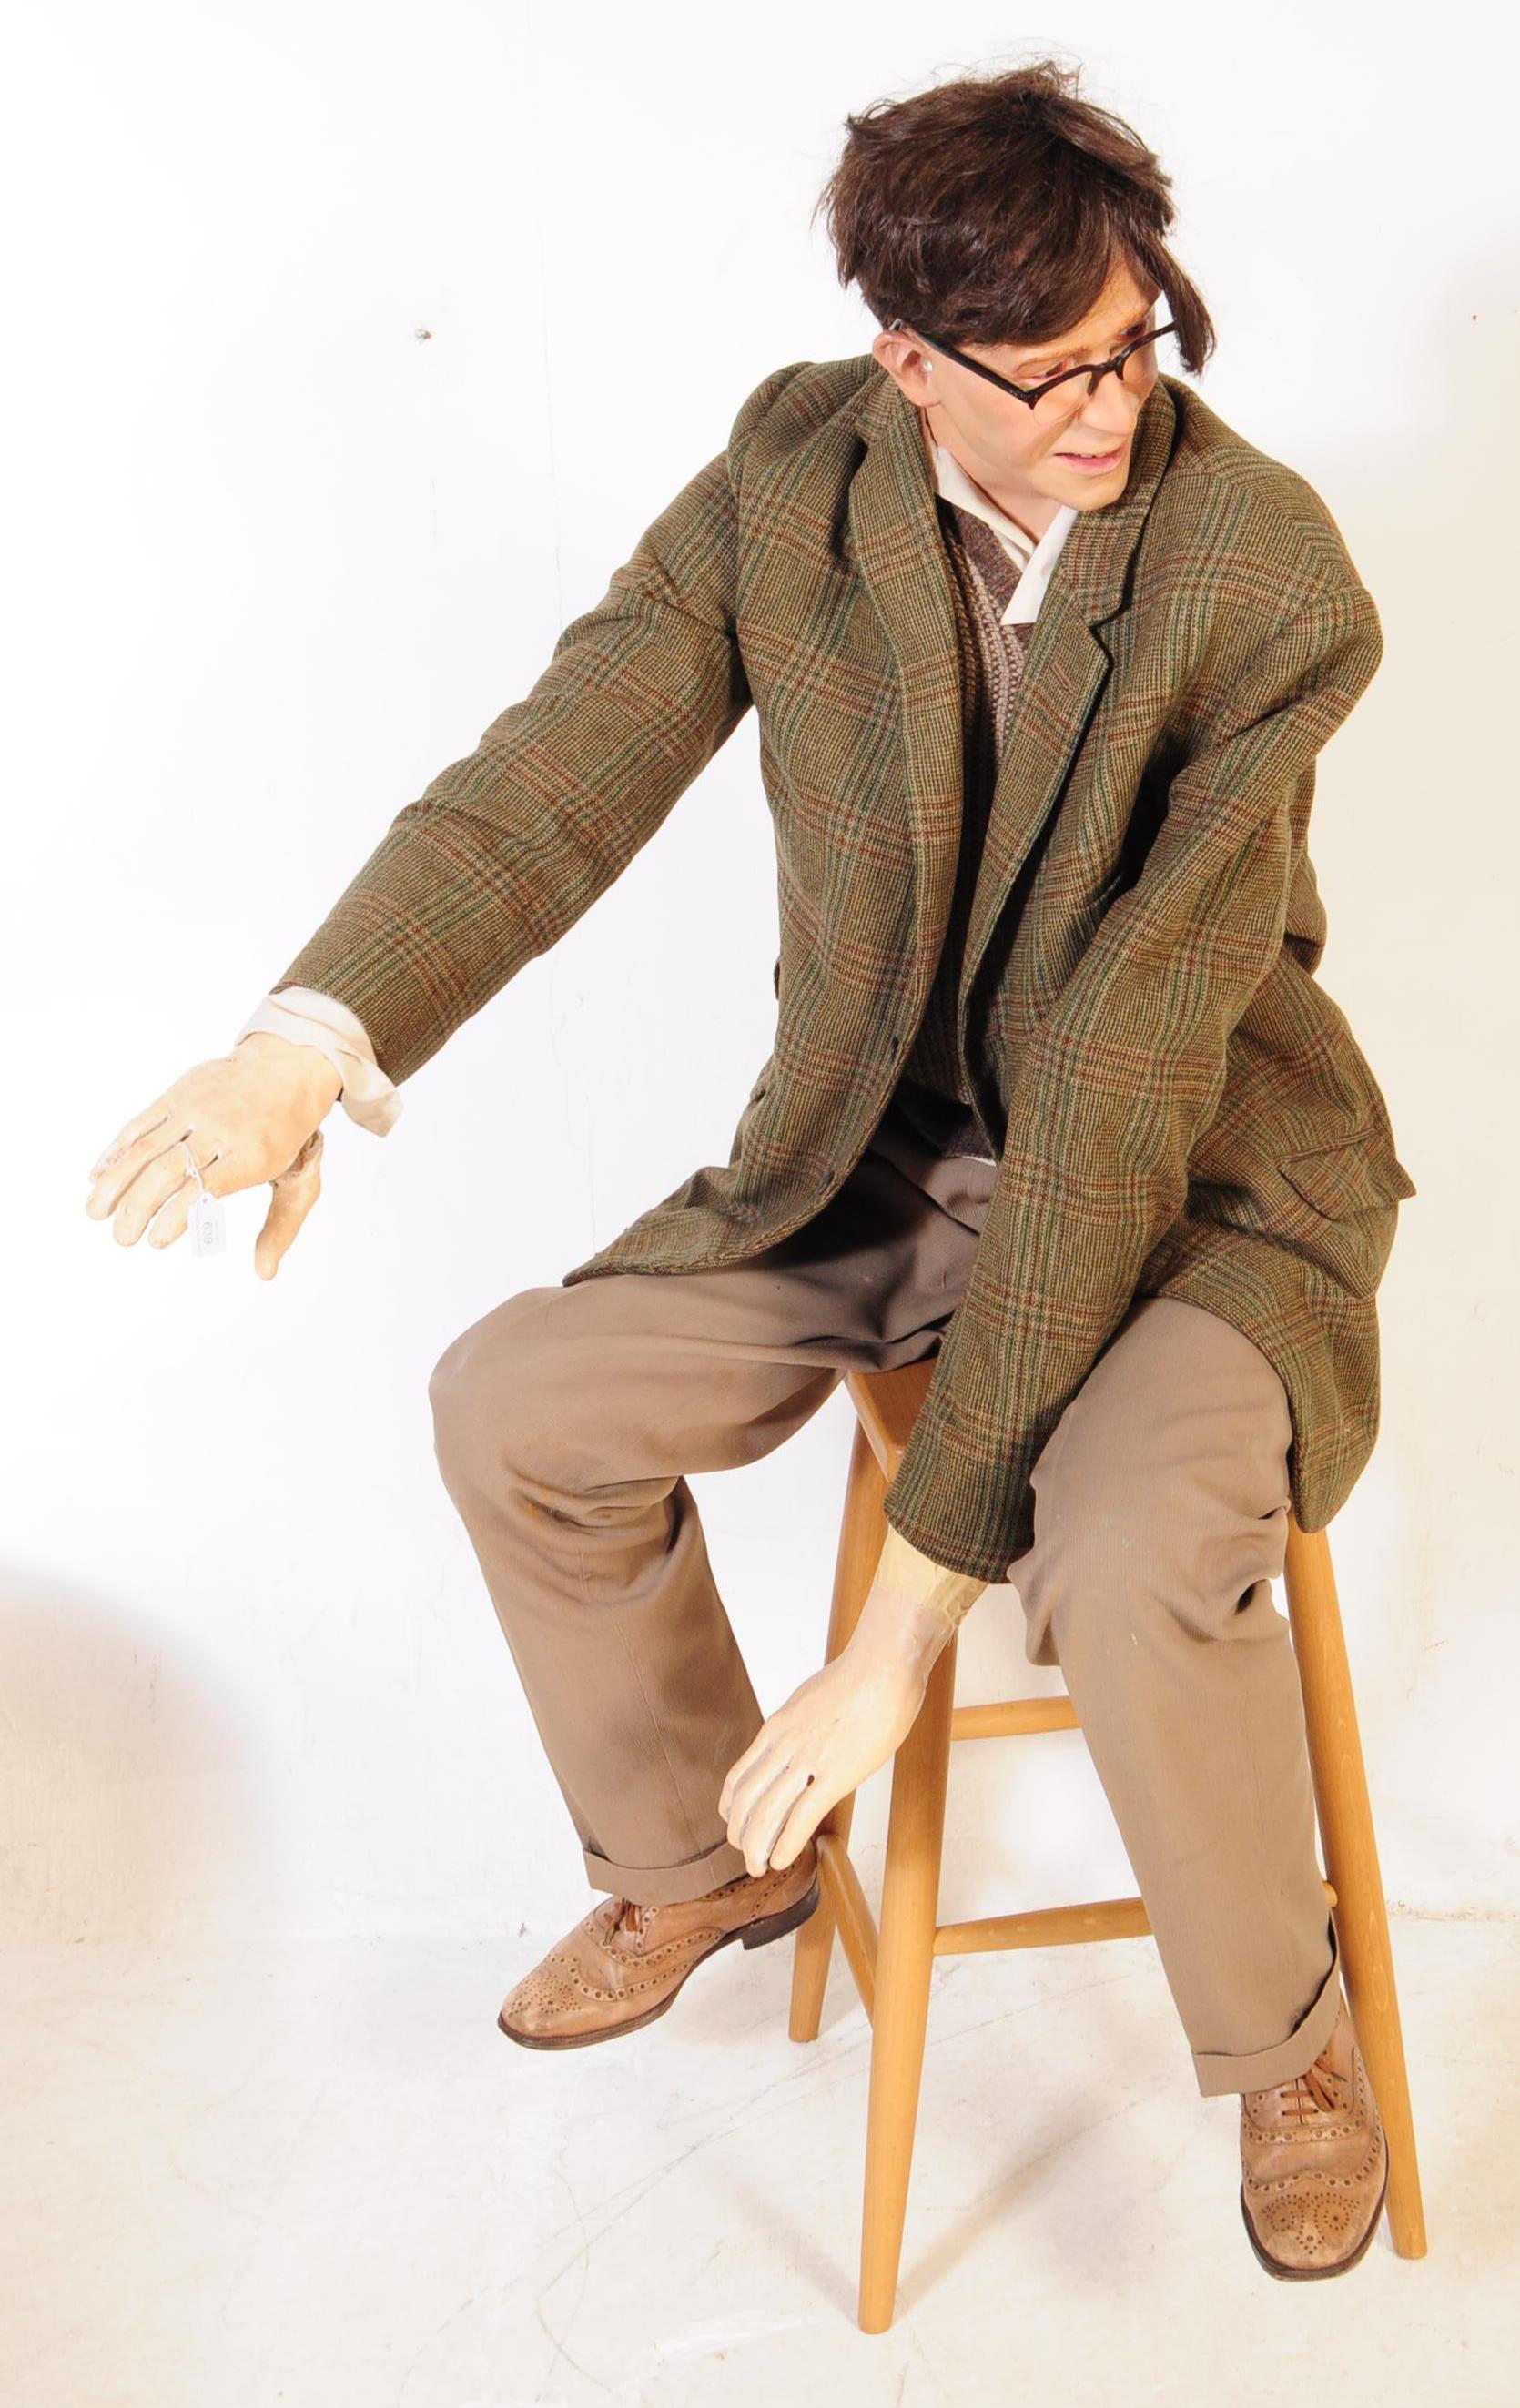 LATE 20TH CENTURY LIFE SIZE SEATED COUNTRY GENT MANNEQUIN - Image 2 of 7